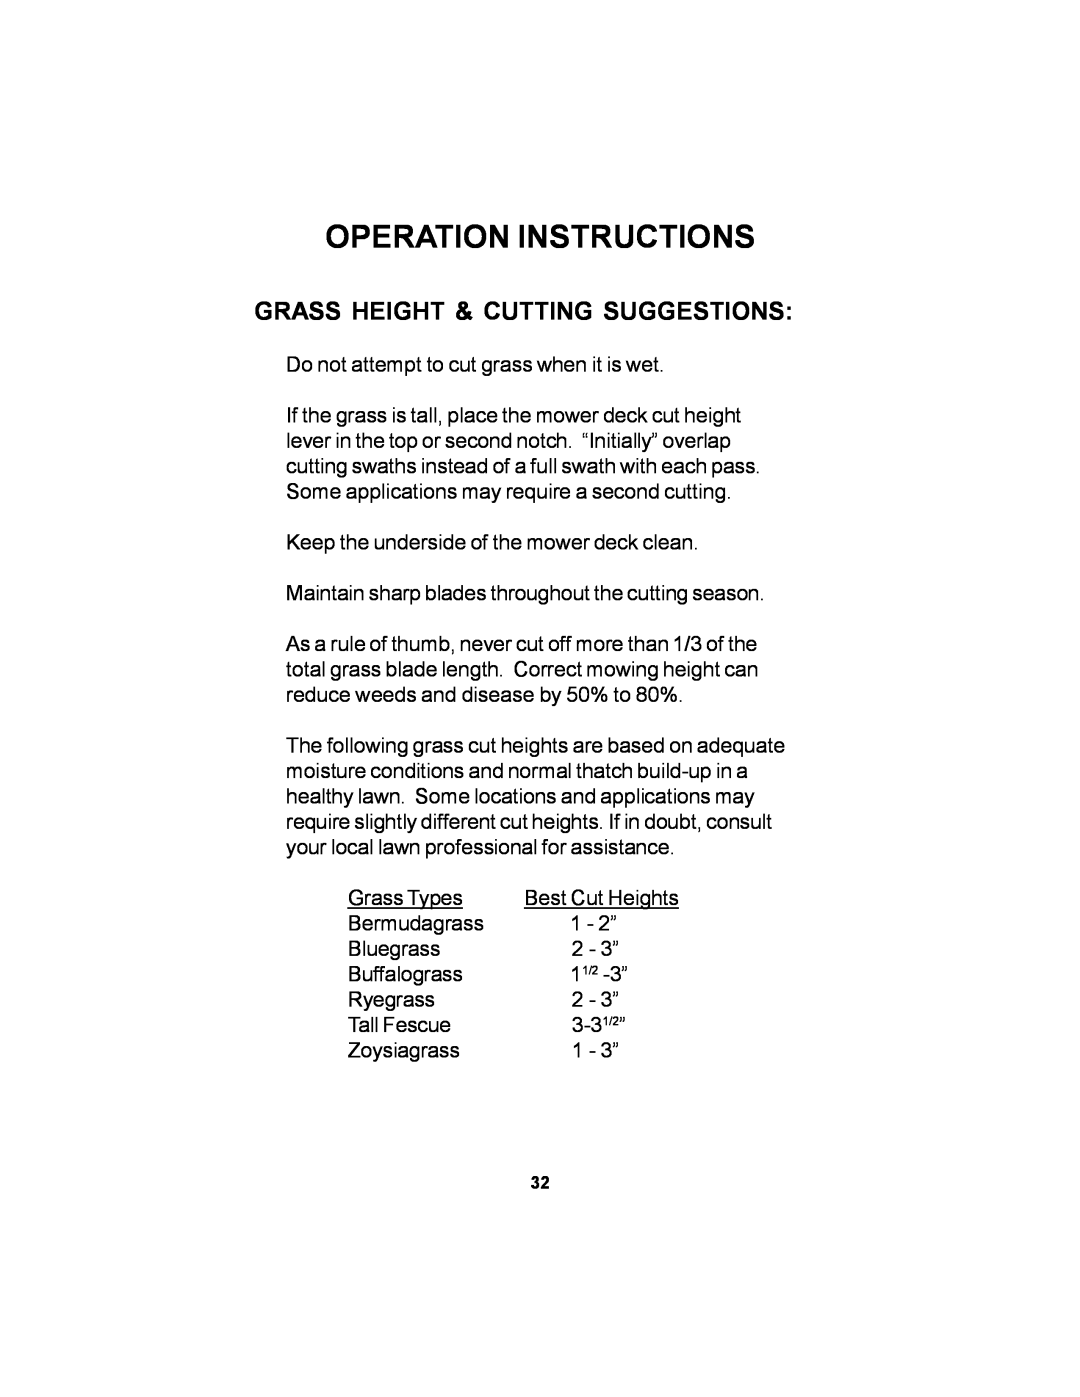 Dixon 11249-106 manual Grass Height & Cutting Suggestions, Operation Instructions 